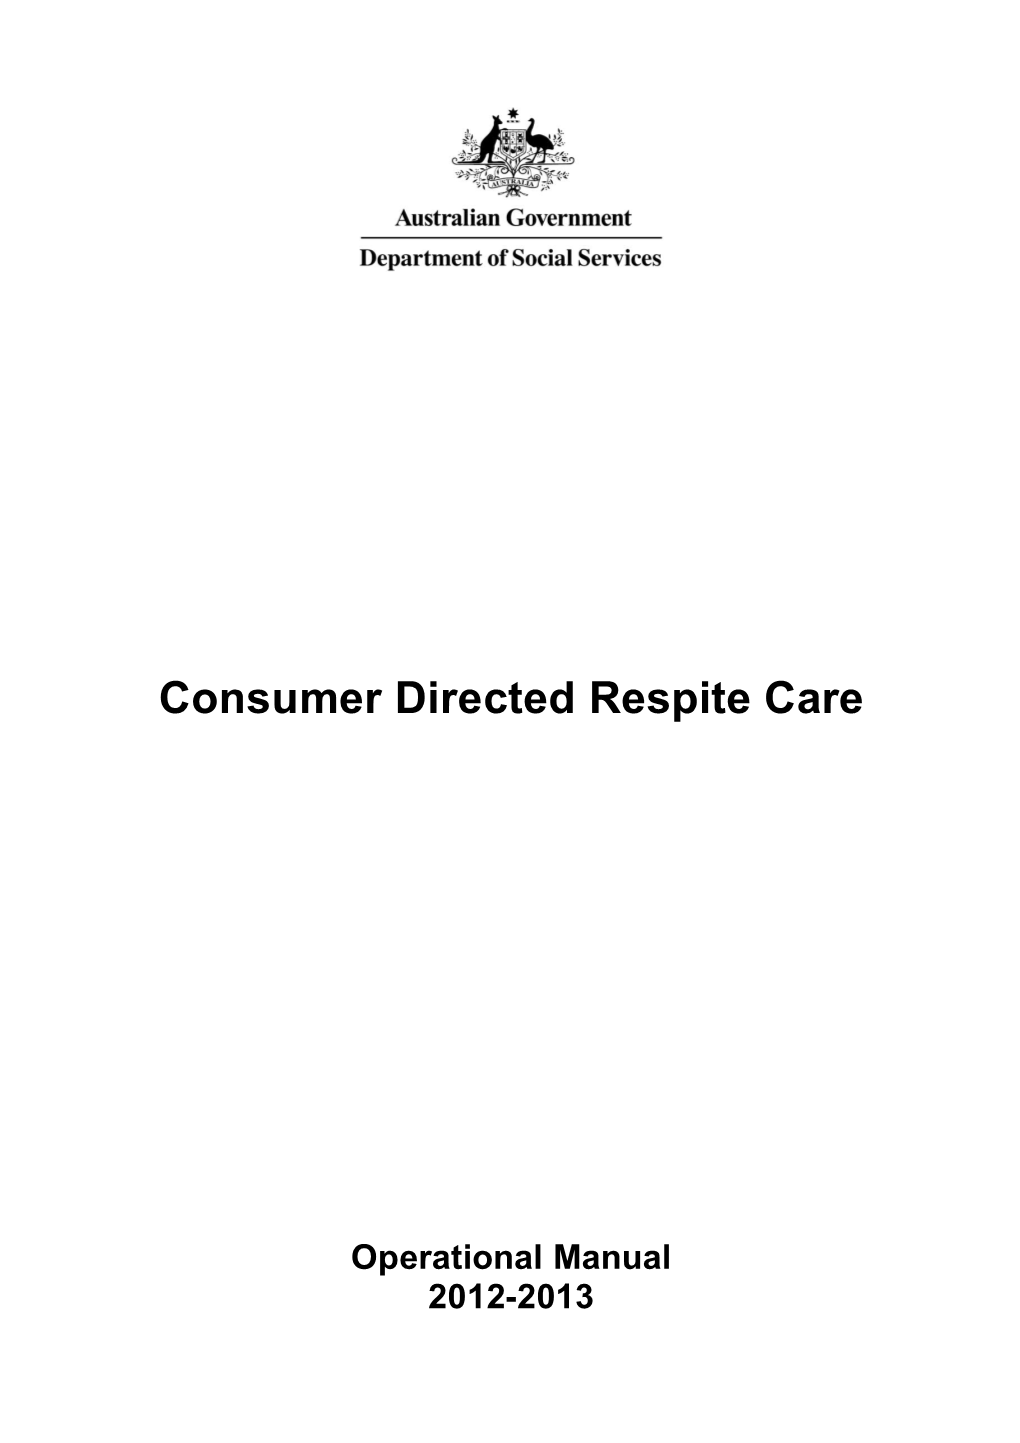 Consumer Directed Respite Care Operational Manual 2012-13